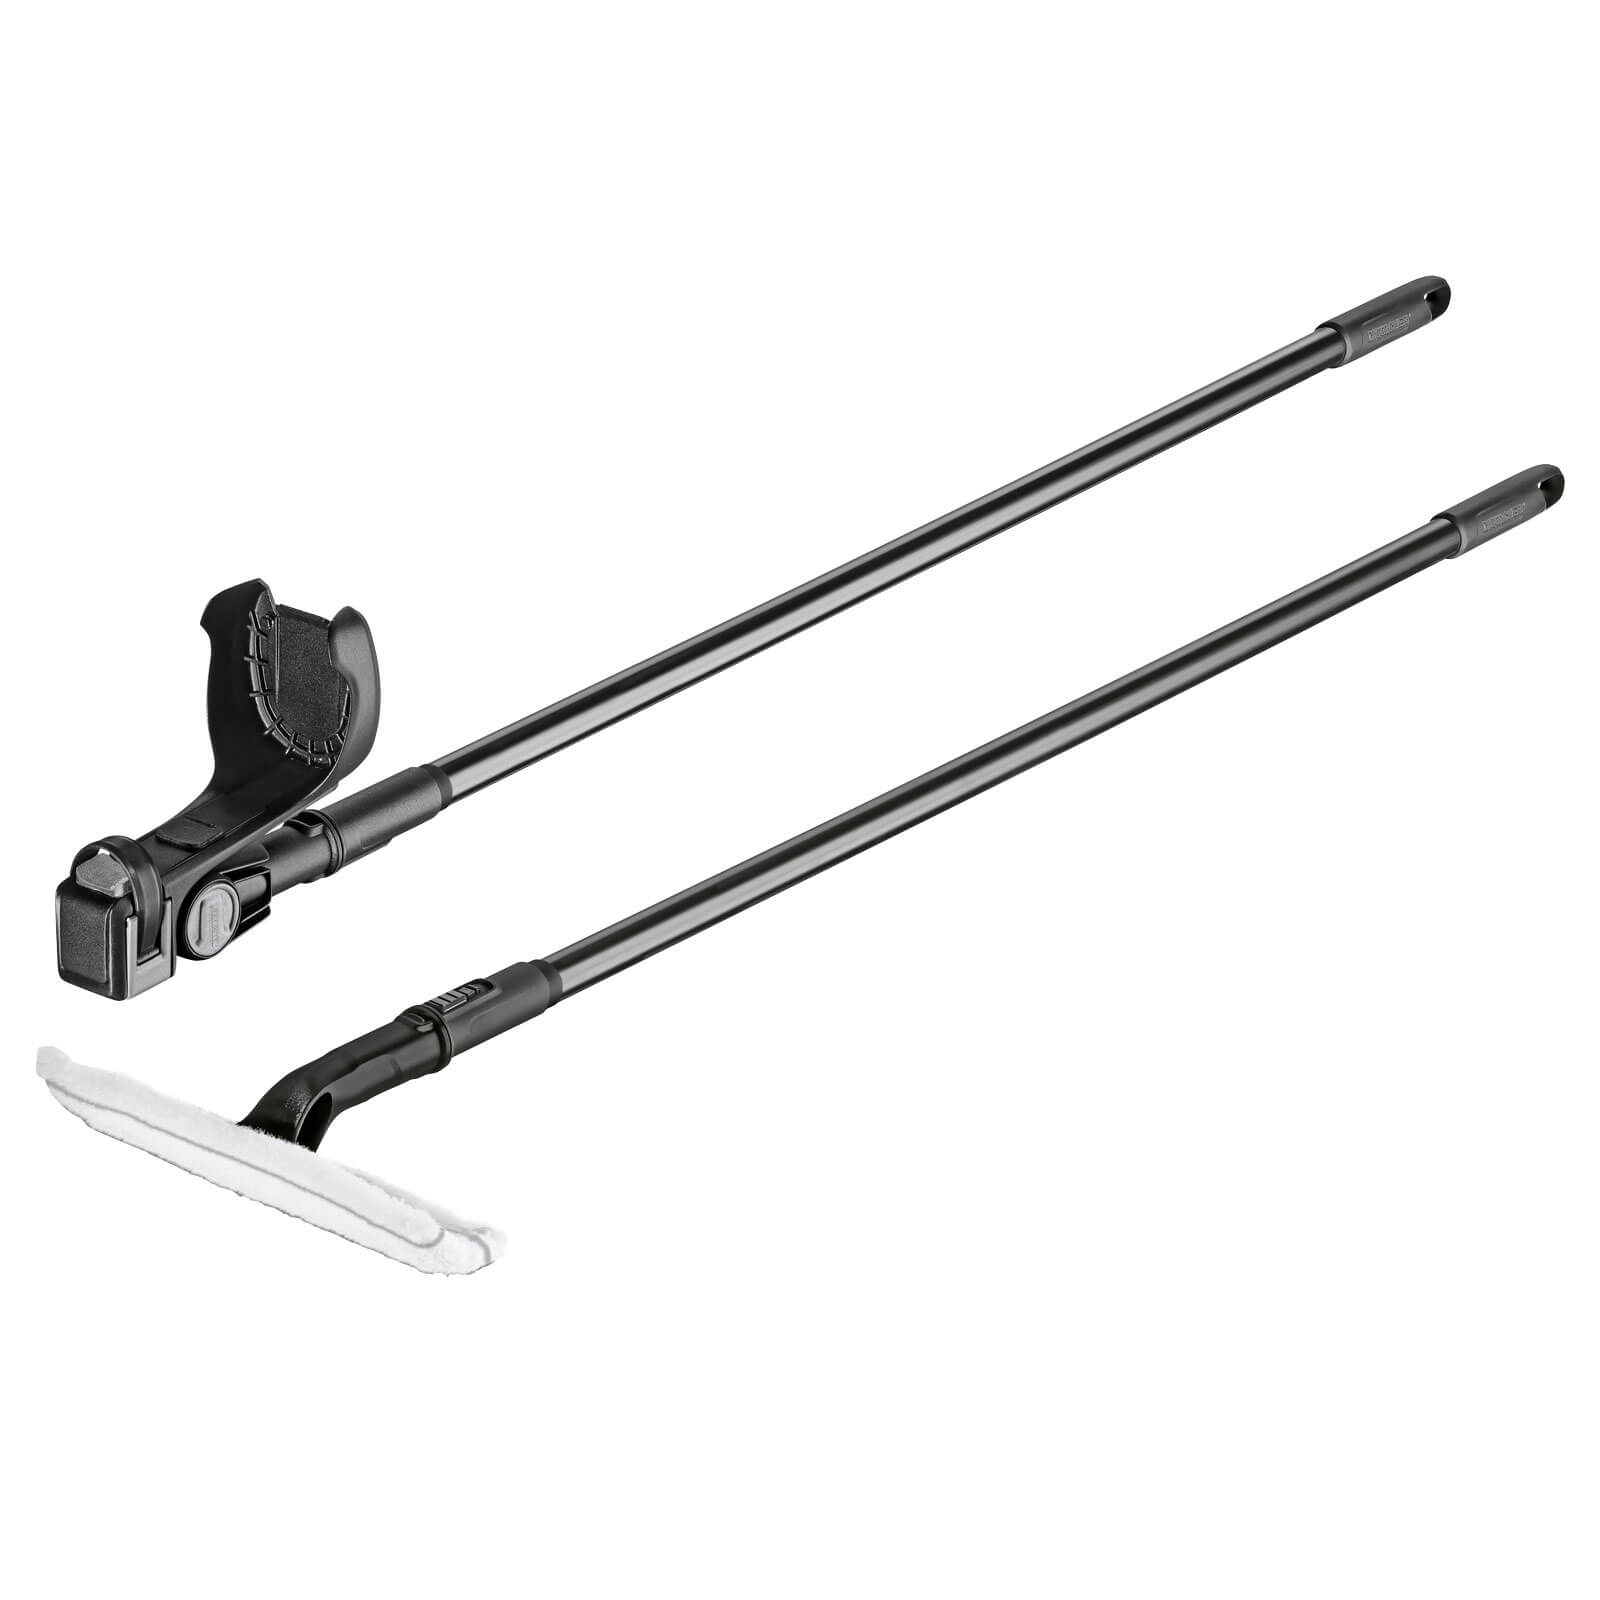 Image of Karcher Extension Pole for Karcher WV 50, 60, 70, 1, 2 and 5 Window Vacs 2m